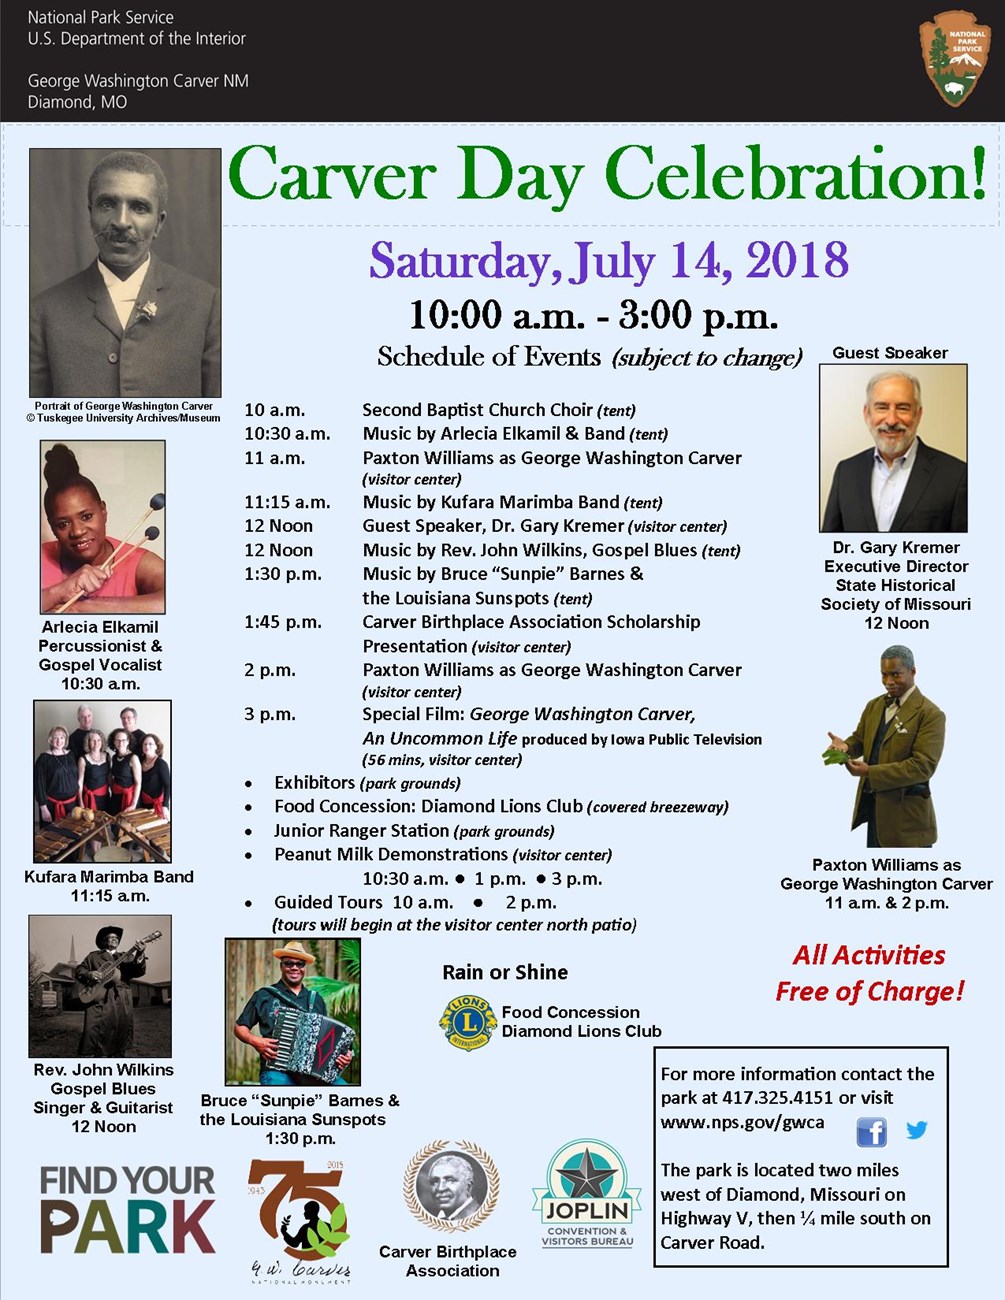 The image is for a park special event: Carver Day. The photograph includes additional images of guest speakers and music performers. There is also color logos and text-schedule of events.